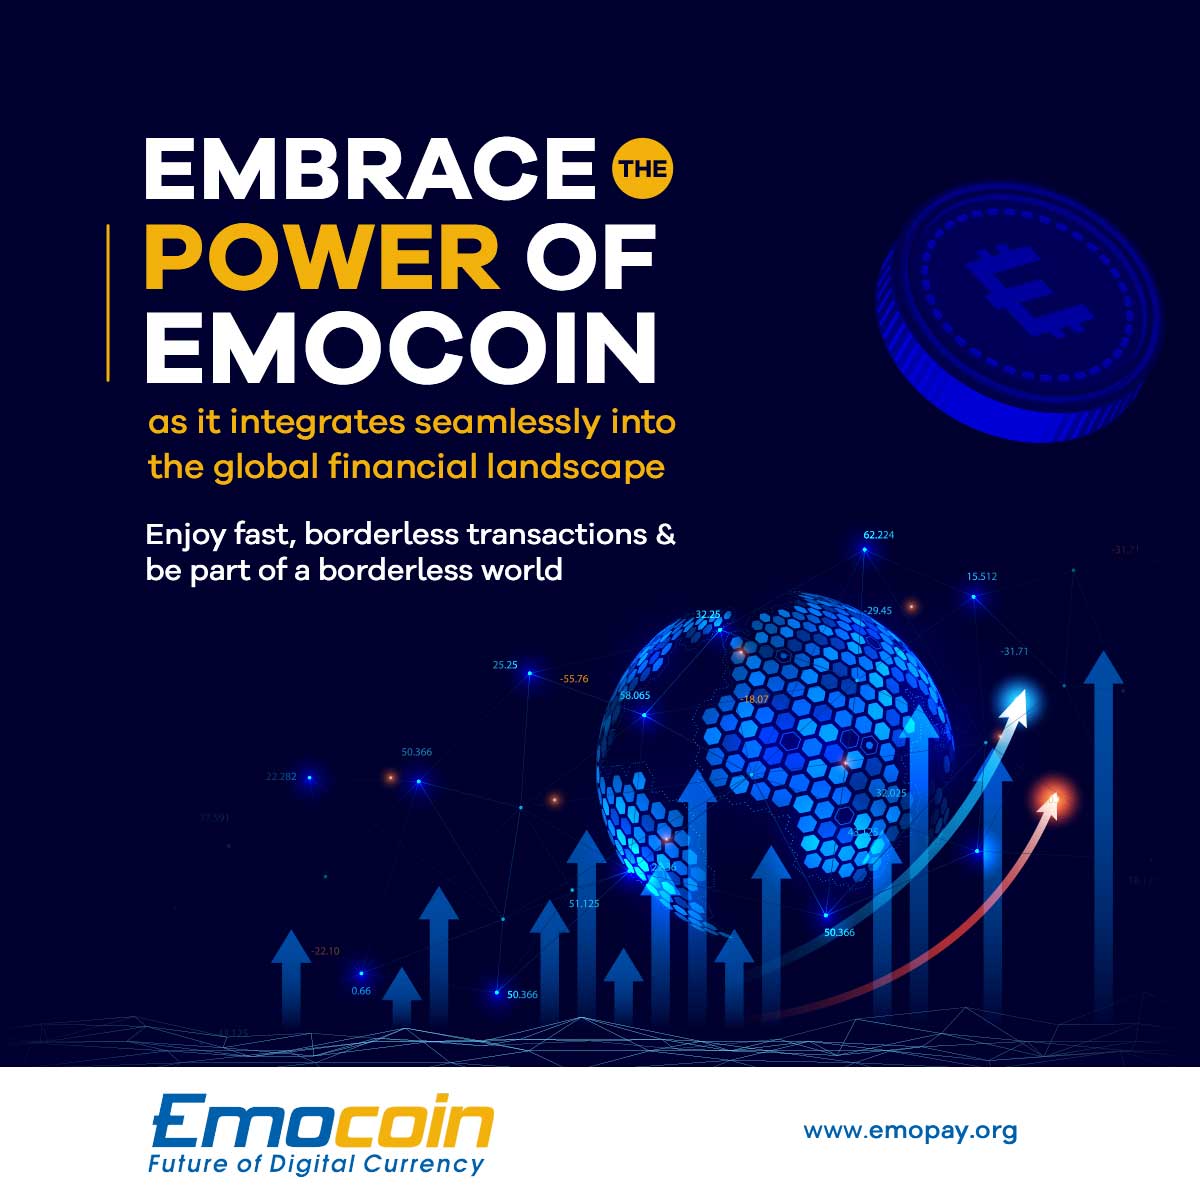 💫🌍 Embrace EmoCoin's power as it integrates into the global financial landscape. Enjoy fast, borderless transactions and join a limitless world. 💎✨

Join us at emopay.org 💸

#EmoCoinPower #FinancialFreedom #Emocoin #InvestInYourFuture #Crypto #Emopay #secure